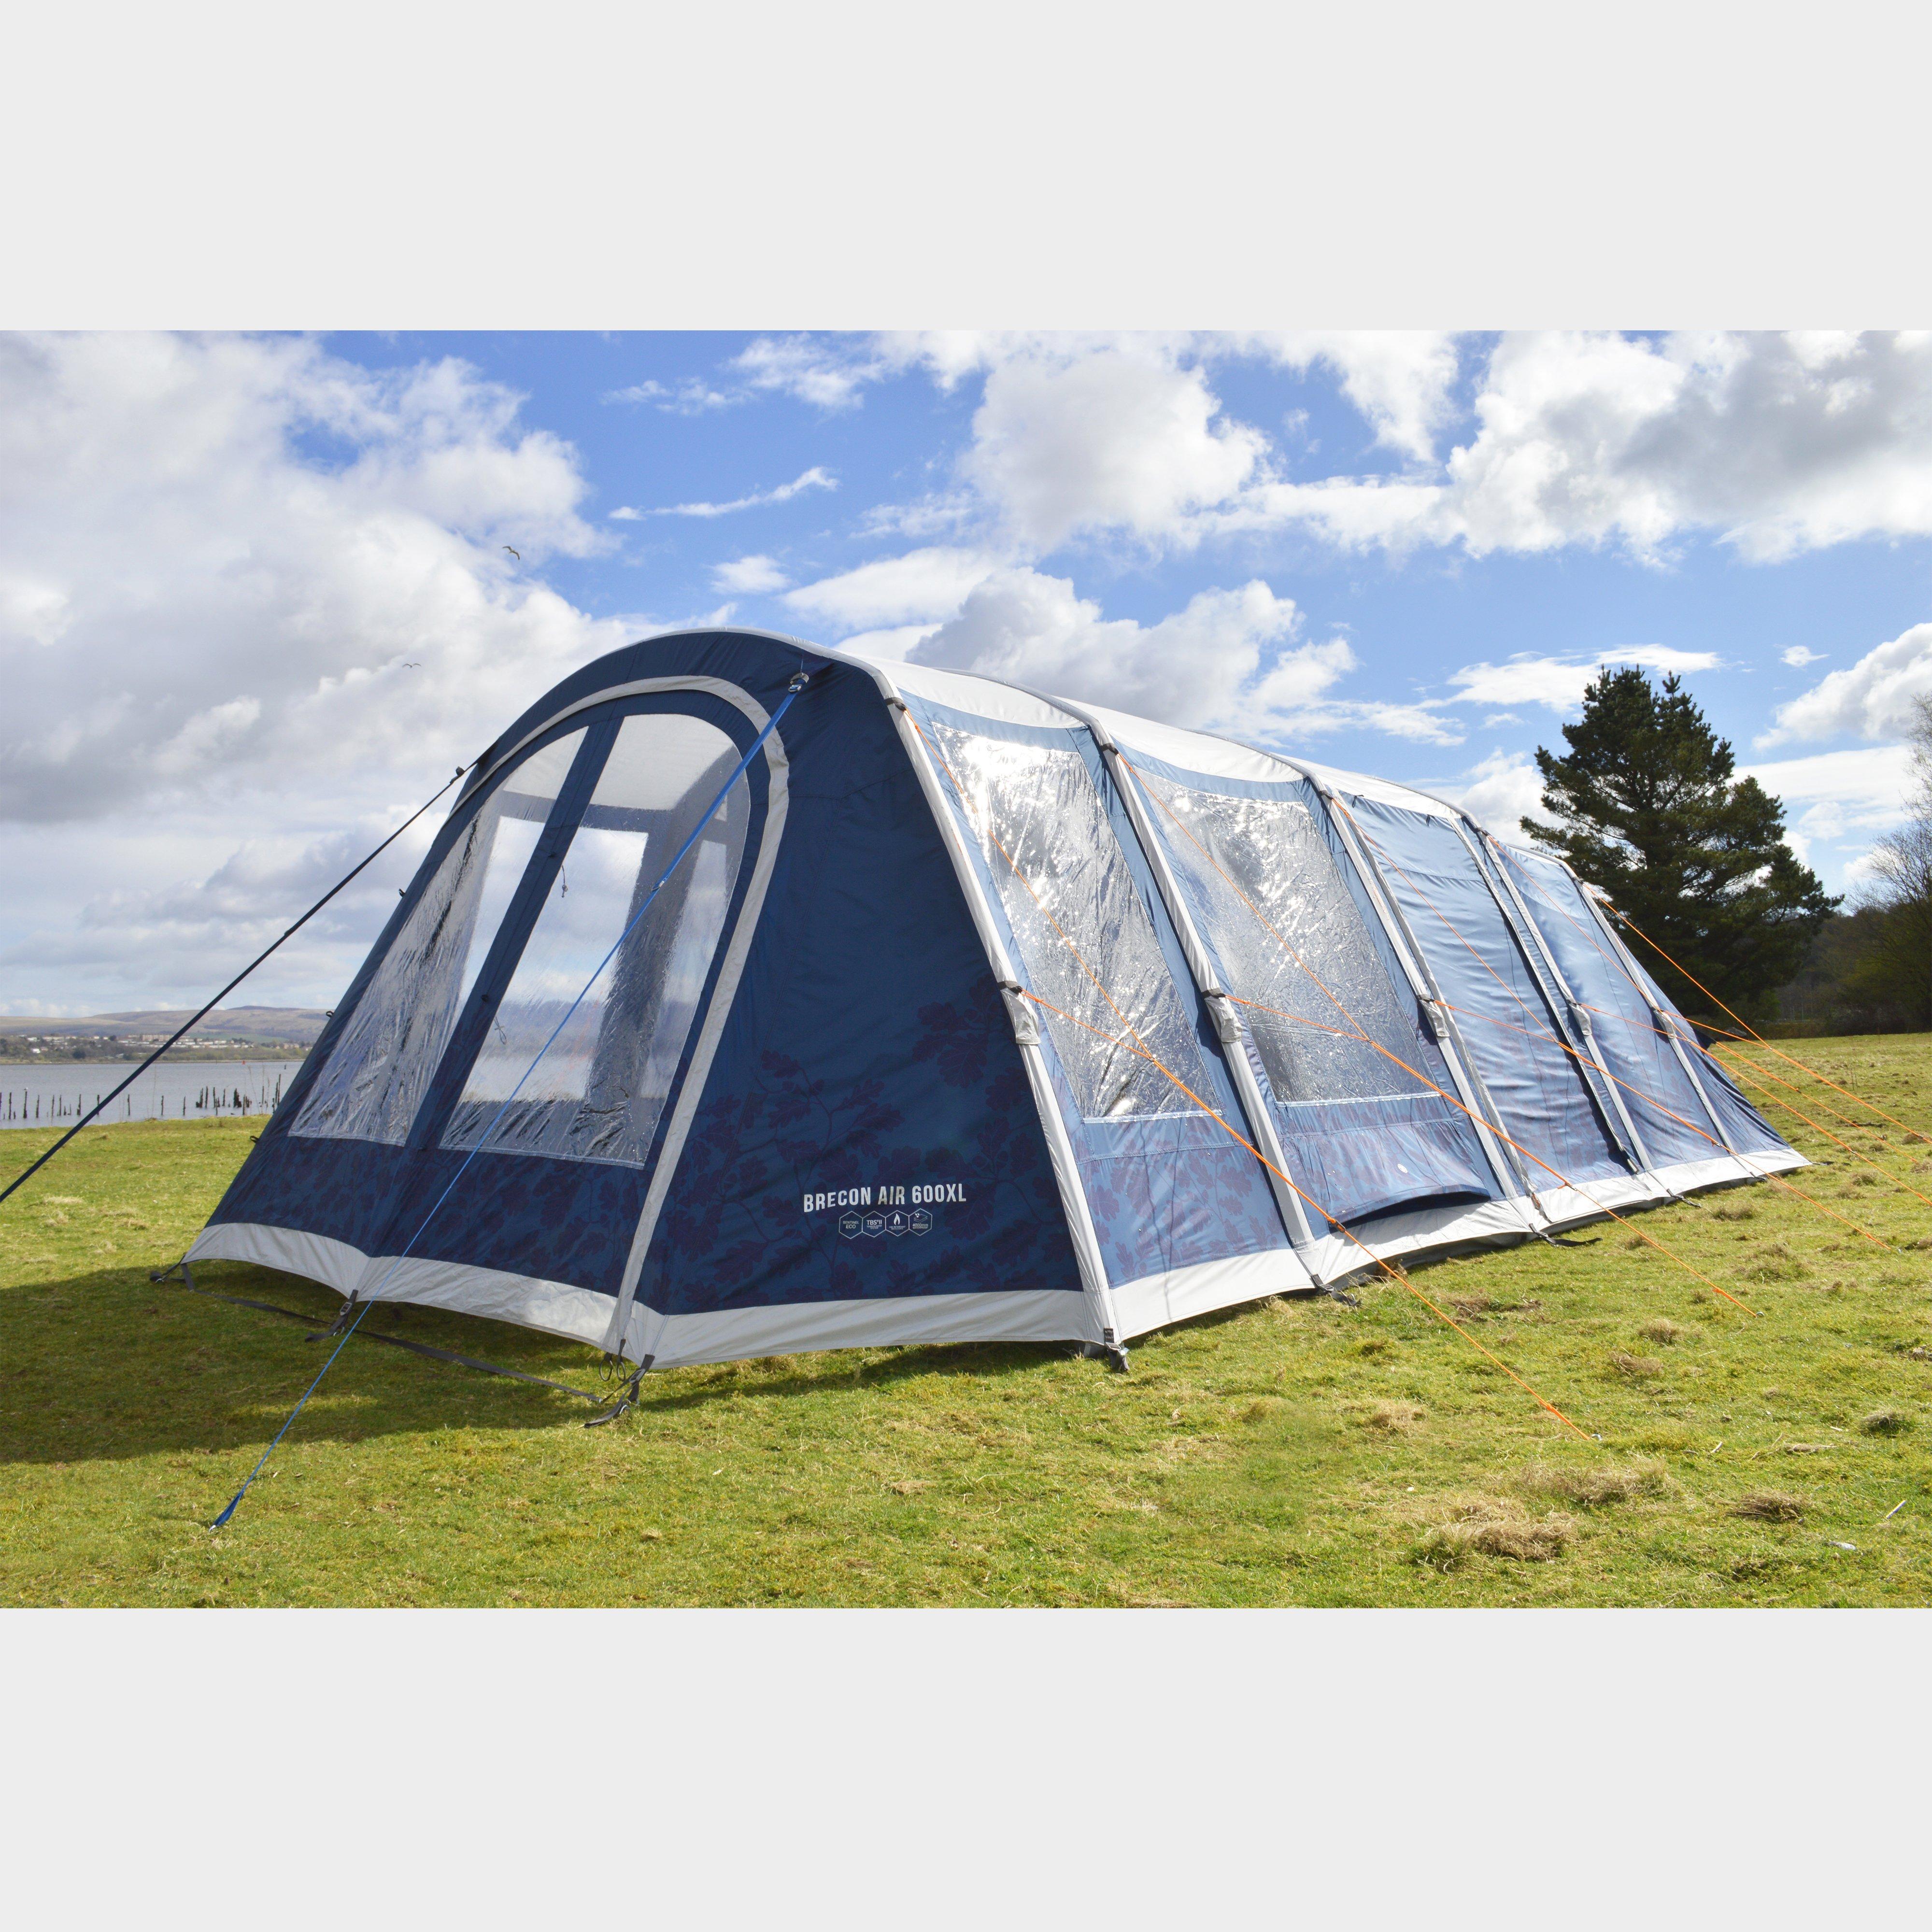 Brecon Air 600 Xl National Trust Edition Air Tent - Navy